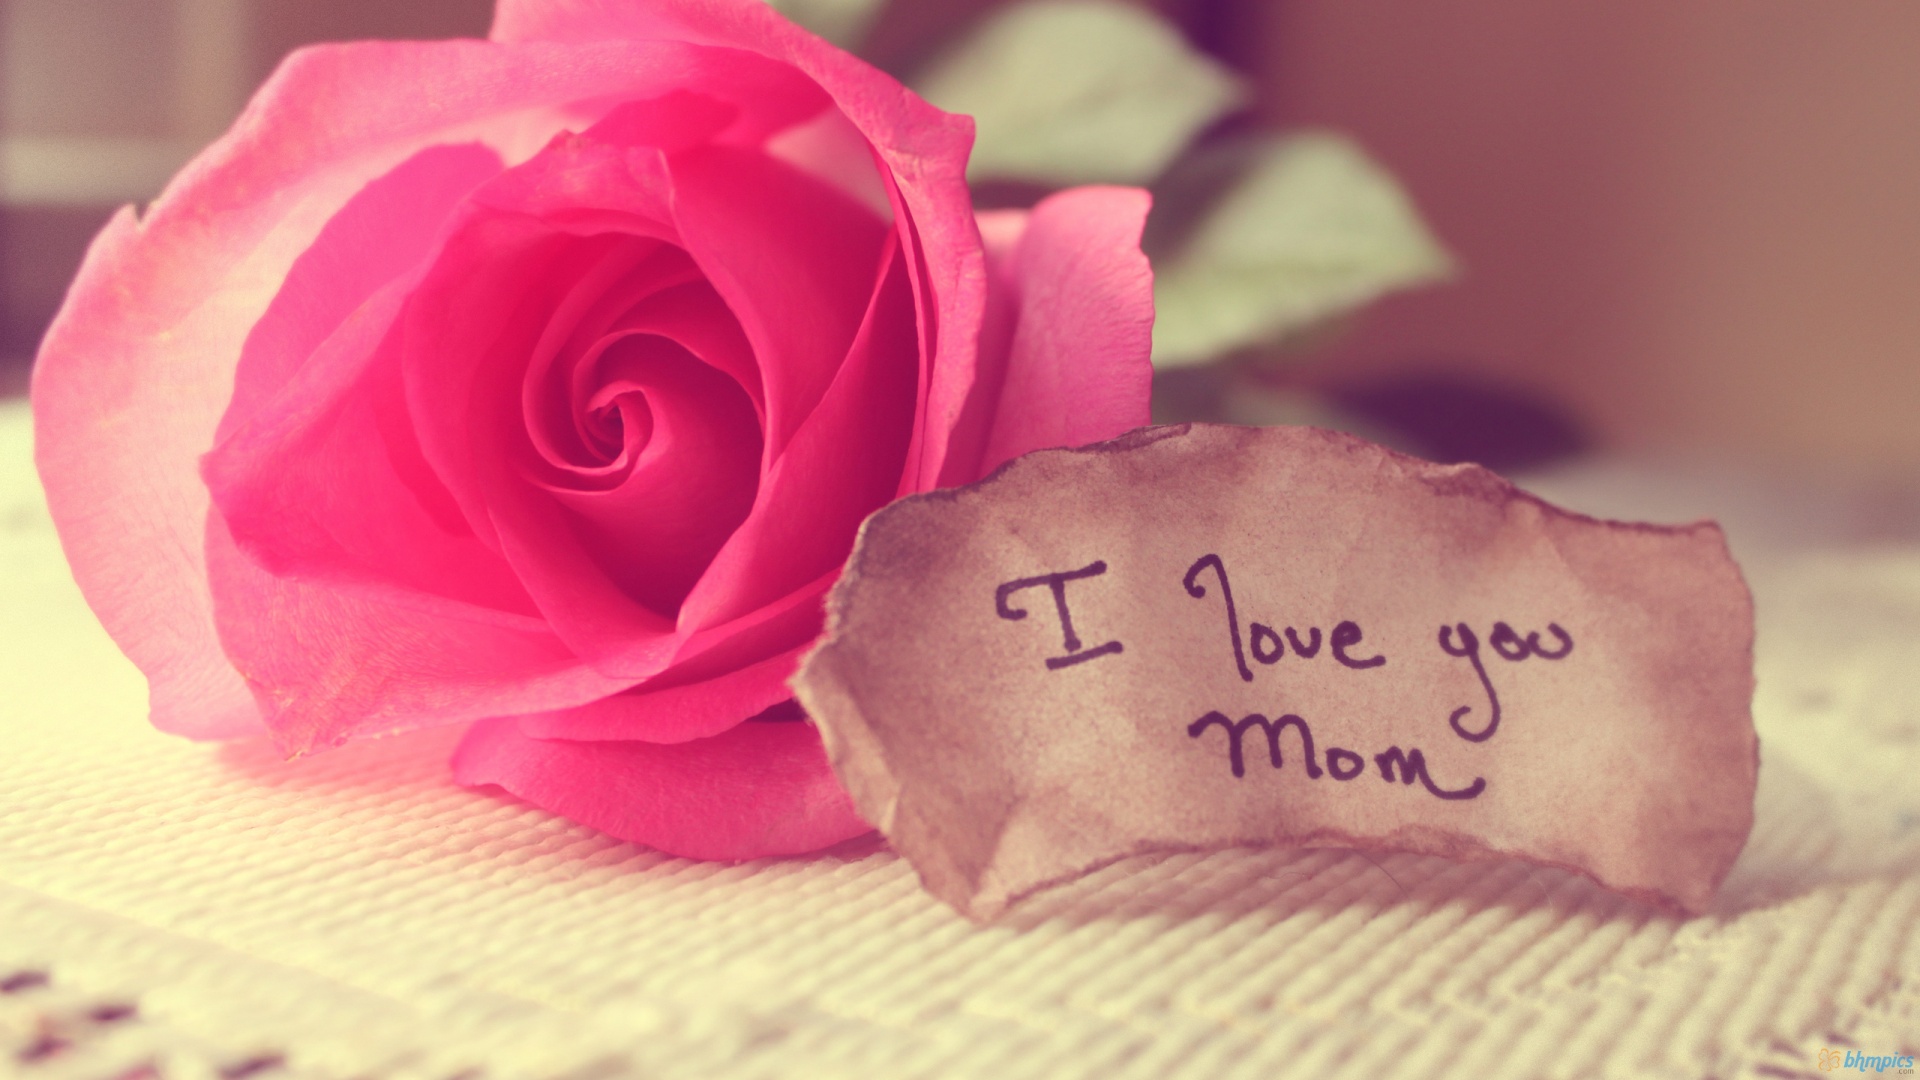 I Love Mom And Dad Wallpapers - Wallpaper Cave-mncb.edu.vn